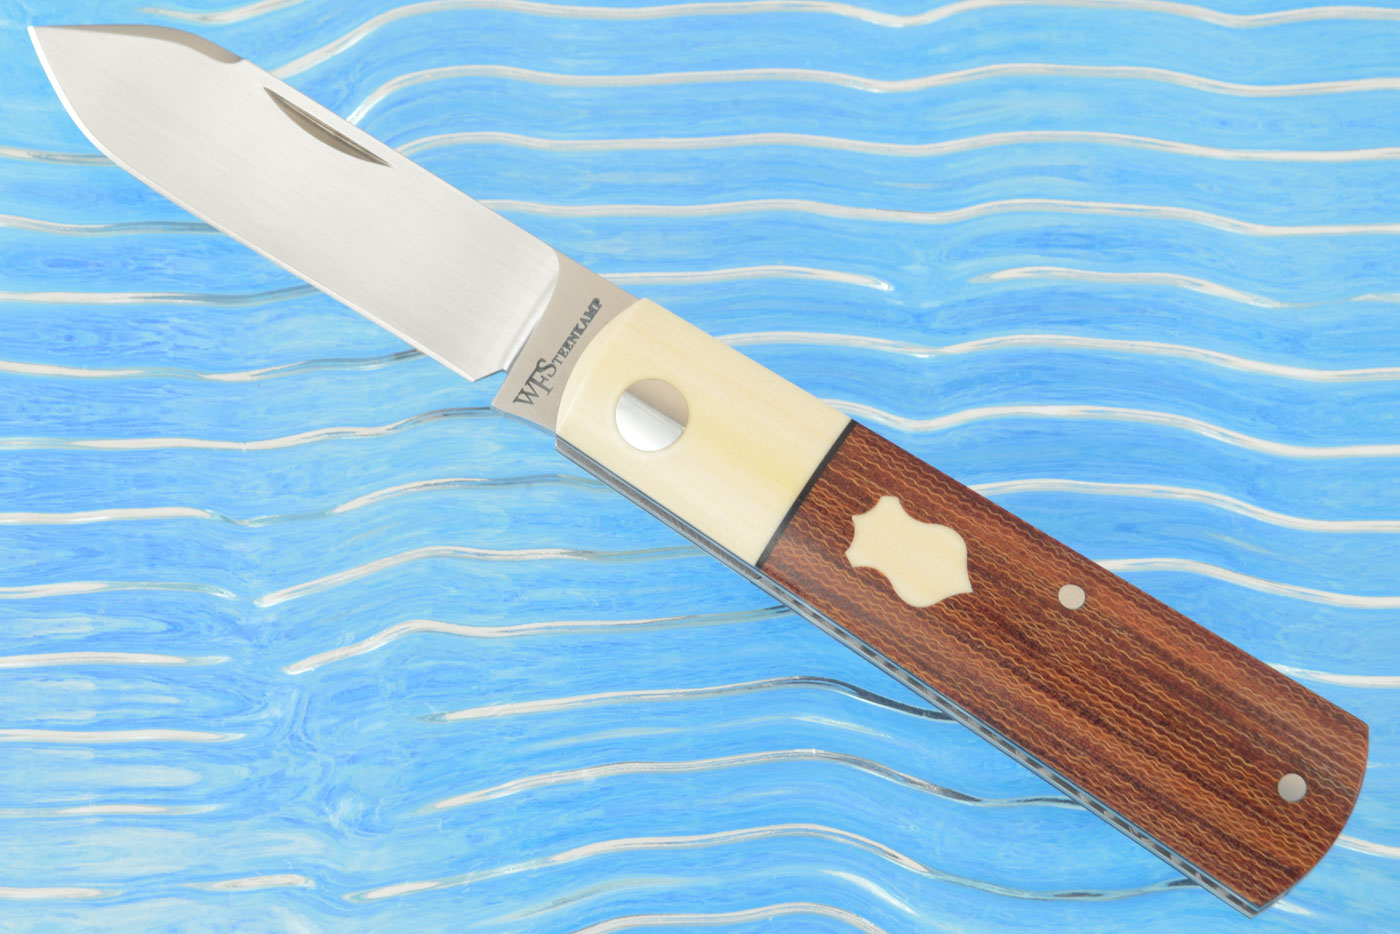 Barlow Slipjoint with Natural and Westinghouse Micarta